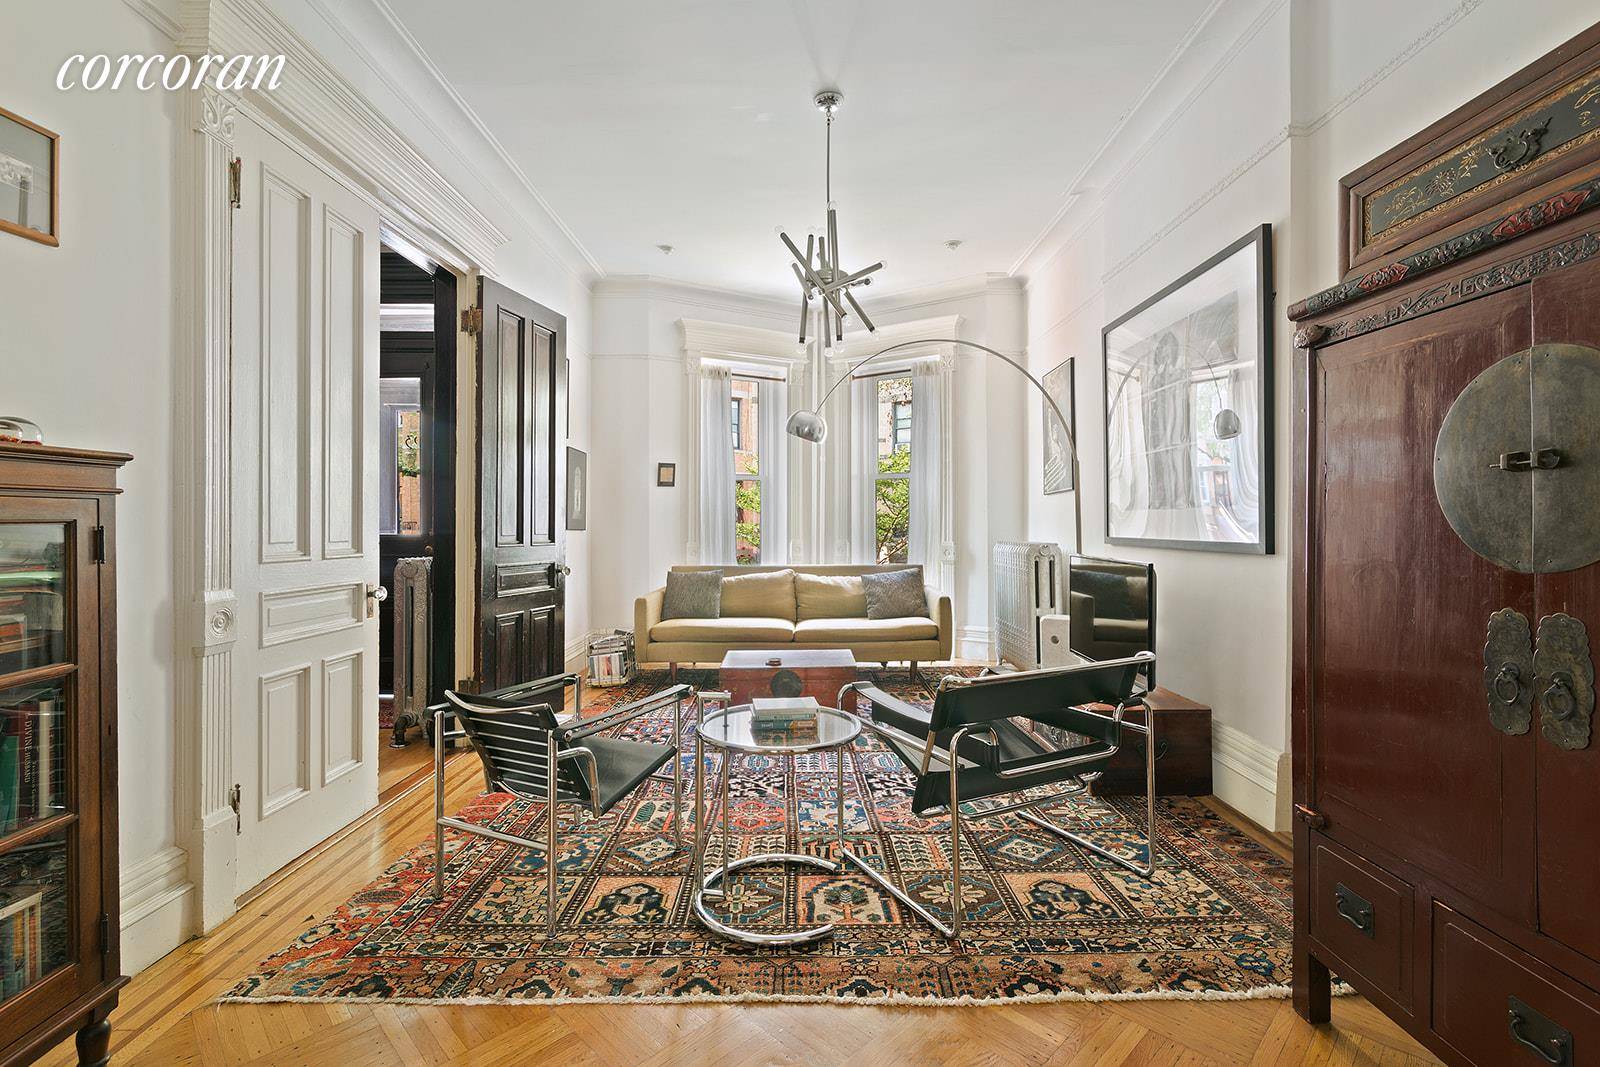 Spanning two extra deep floors and over 2, 200 square feet, this 6 bedroom 2.